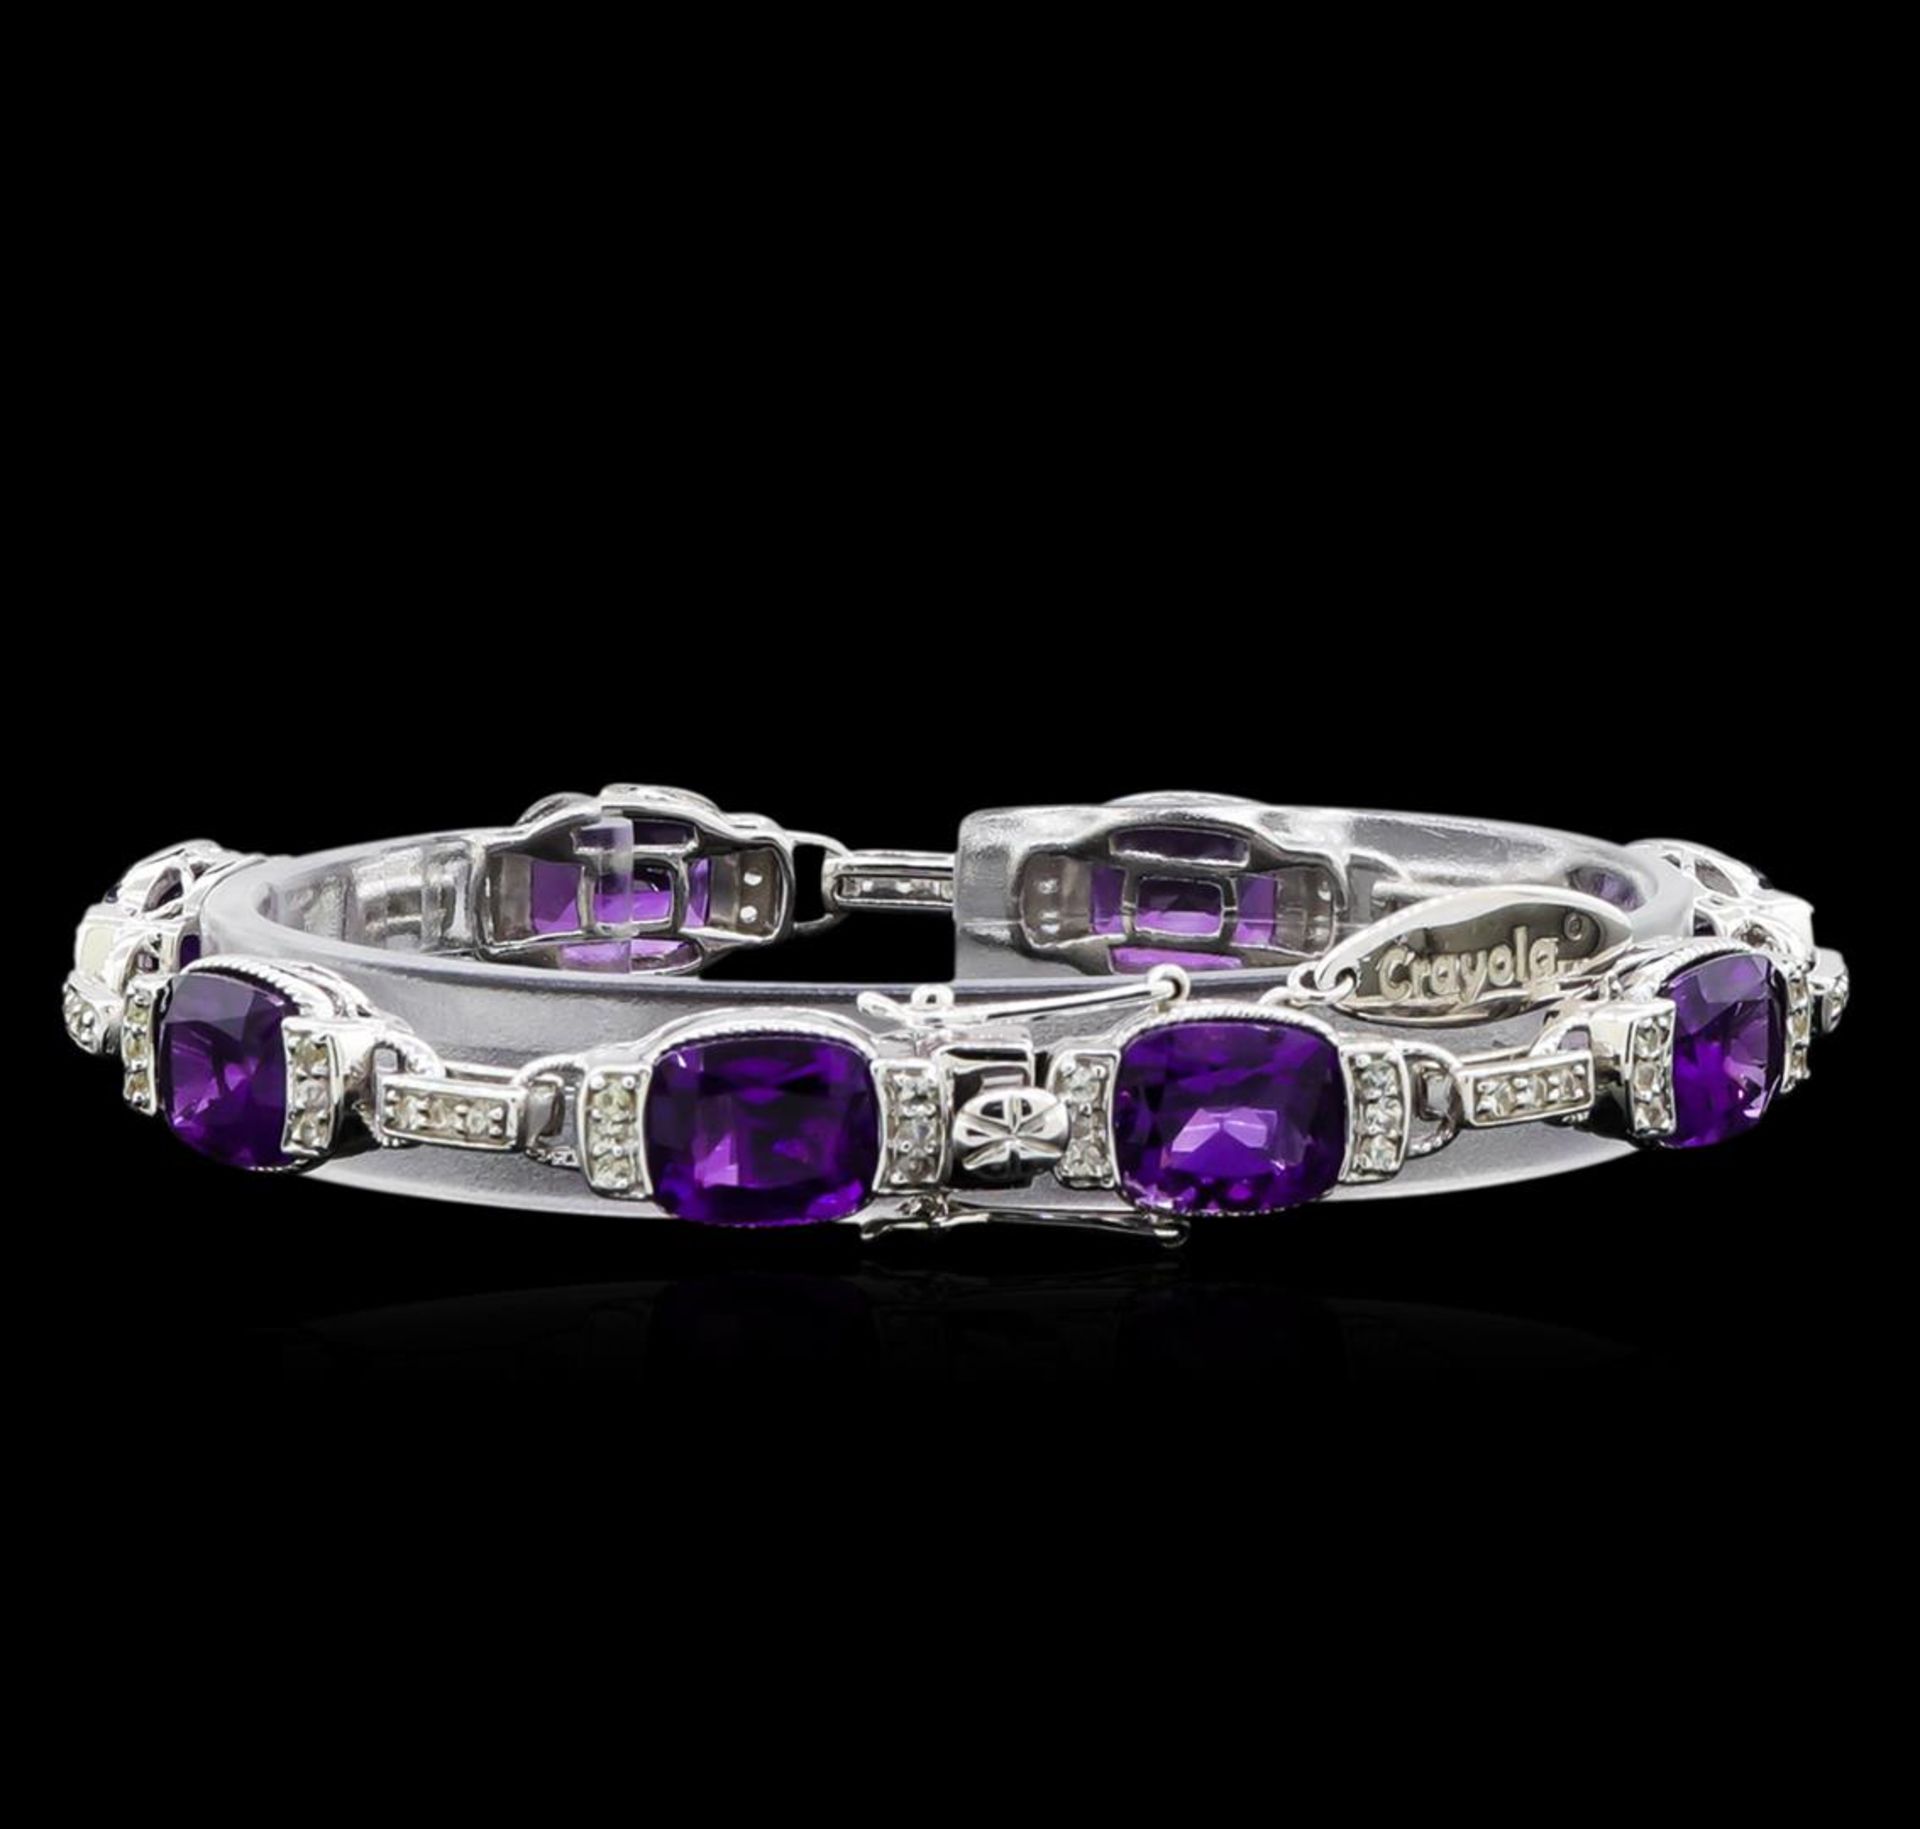 Crayola 20.00 ctw Amethyst and White Sapphire Bracelet - .925 Silver - Image 2 of 3